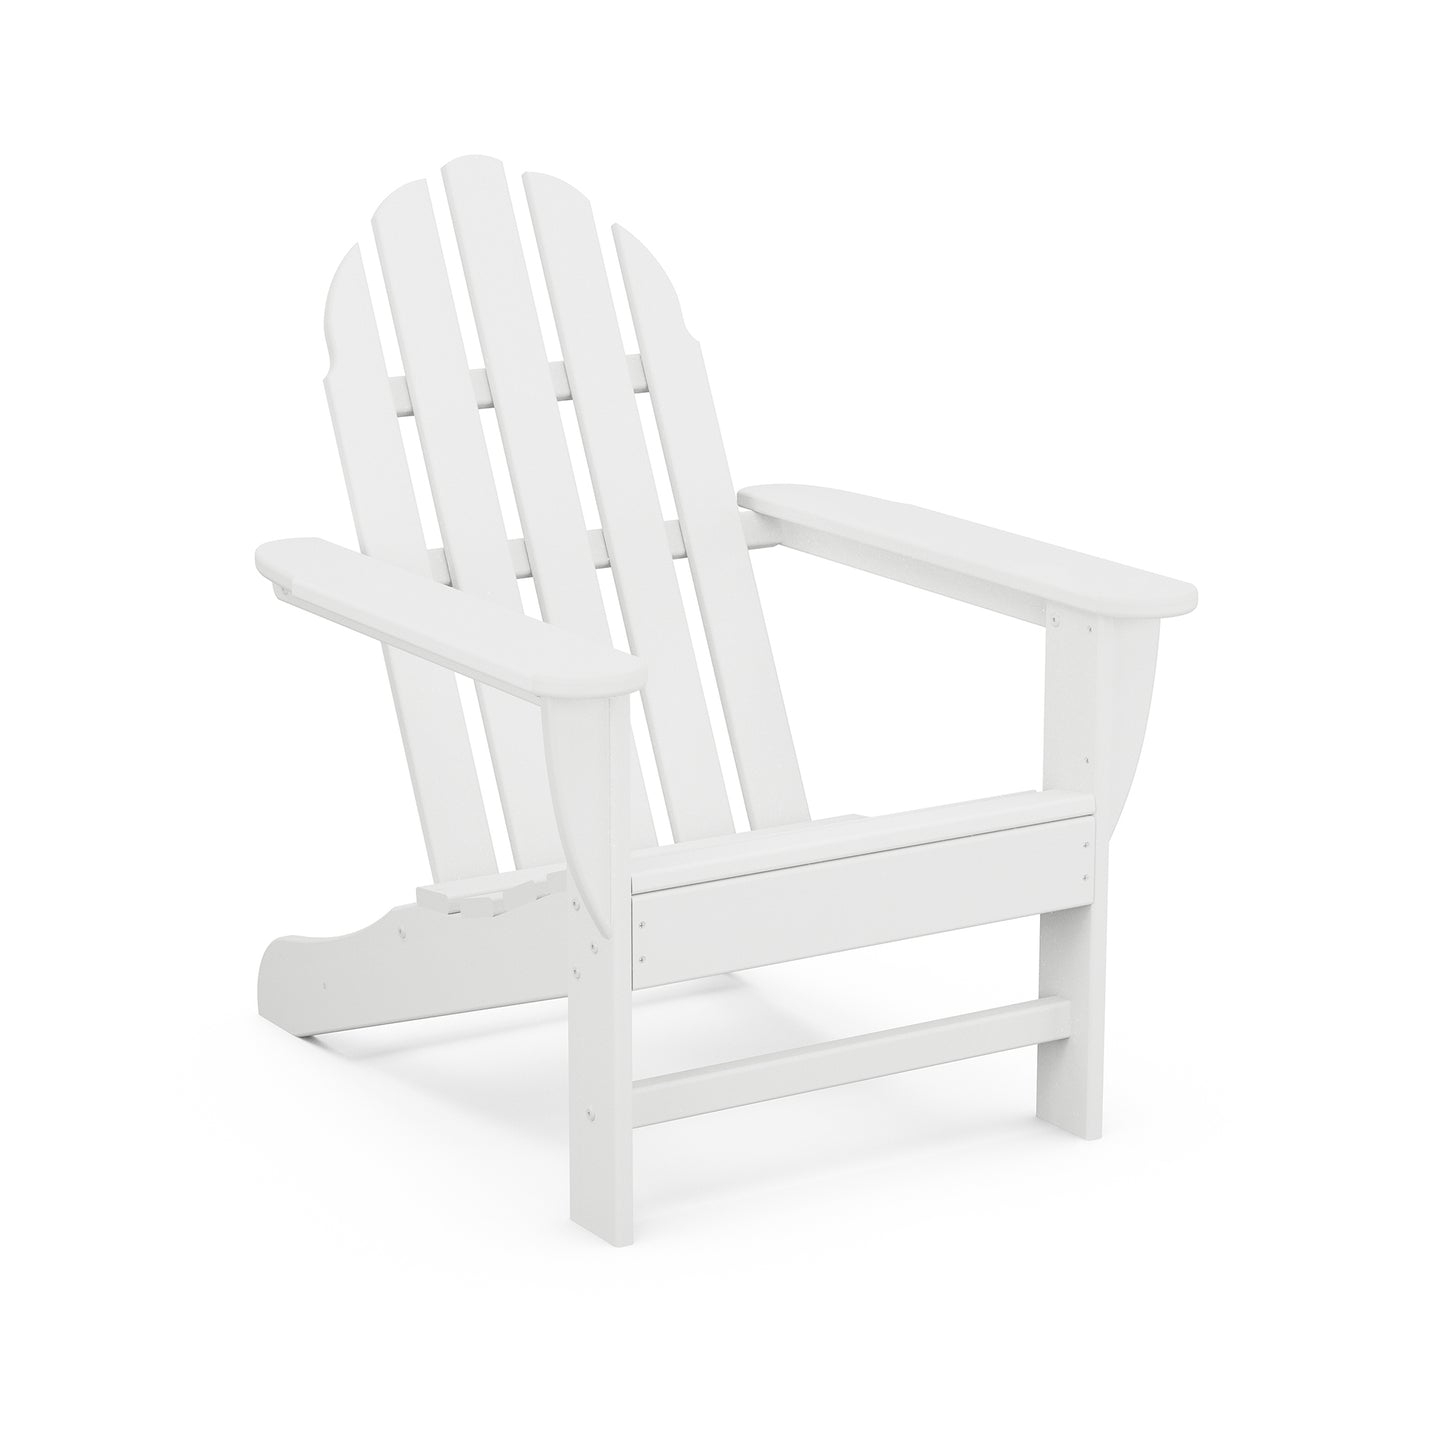 A white POLYWOOD Classic Adirondack Chair, featuring a curved back and slatted design, displayed against an all-white background.